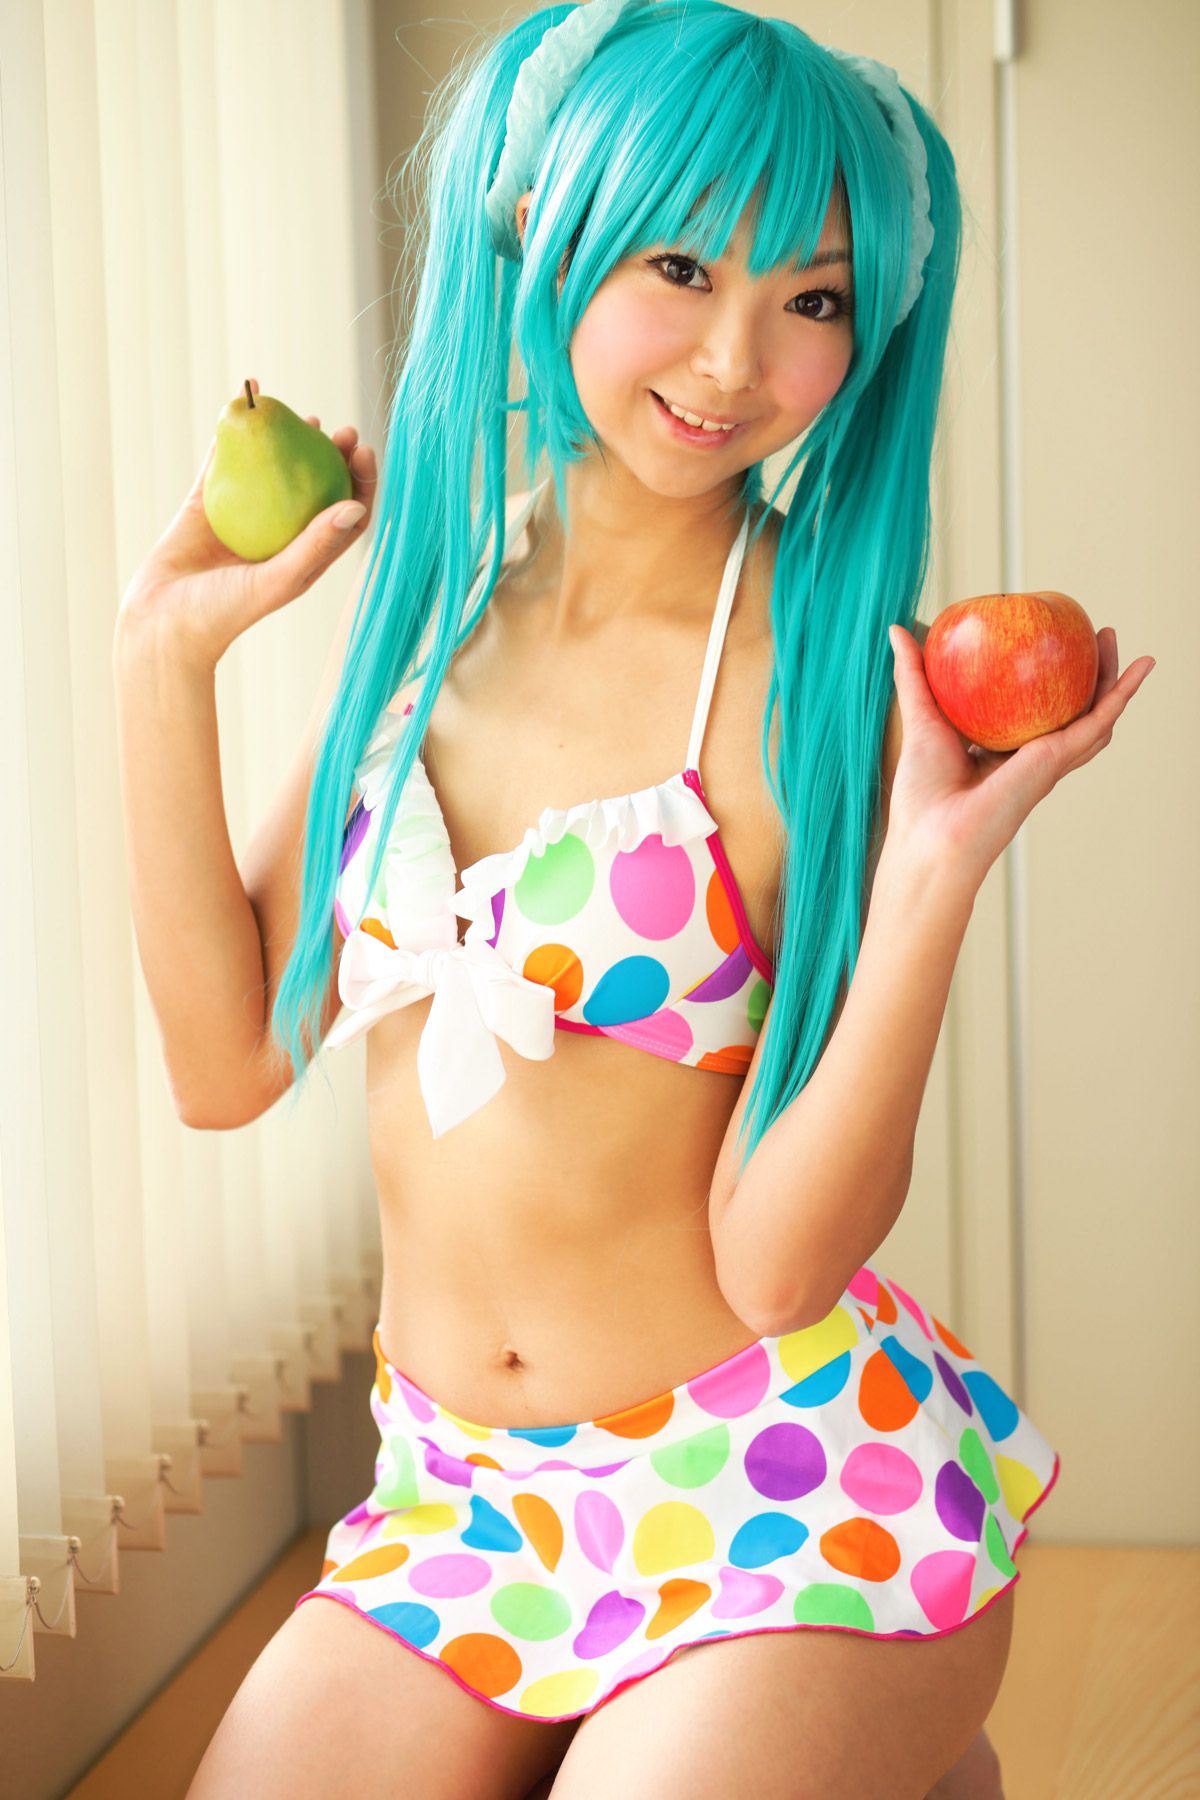 taotuhome[Cosplay] Necoco as Hatsune Miku from Vocaloid 套图第23张